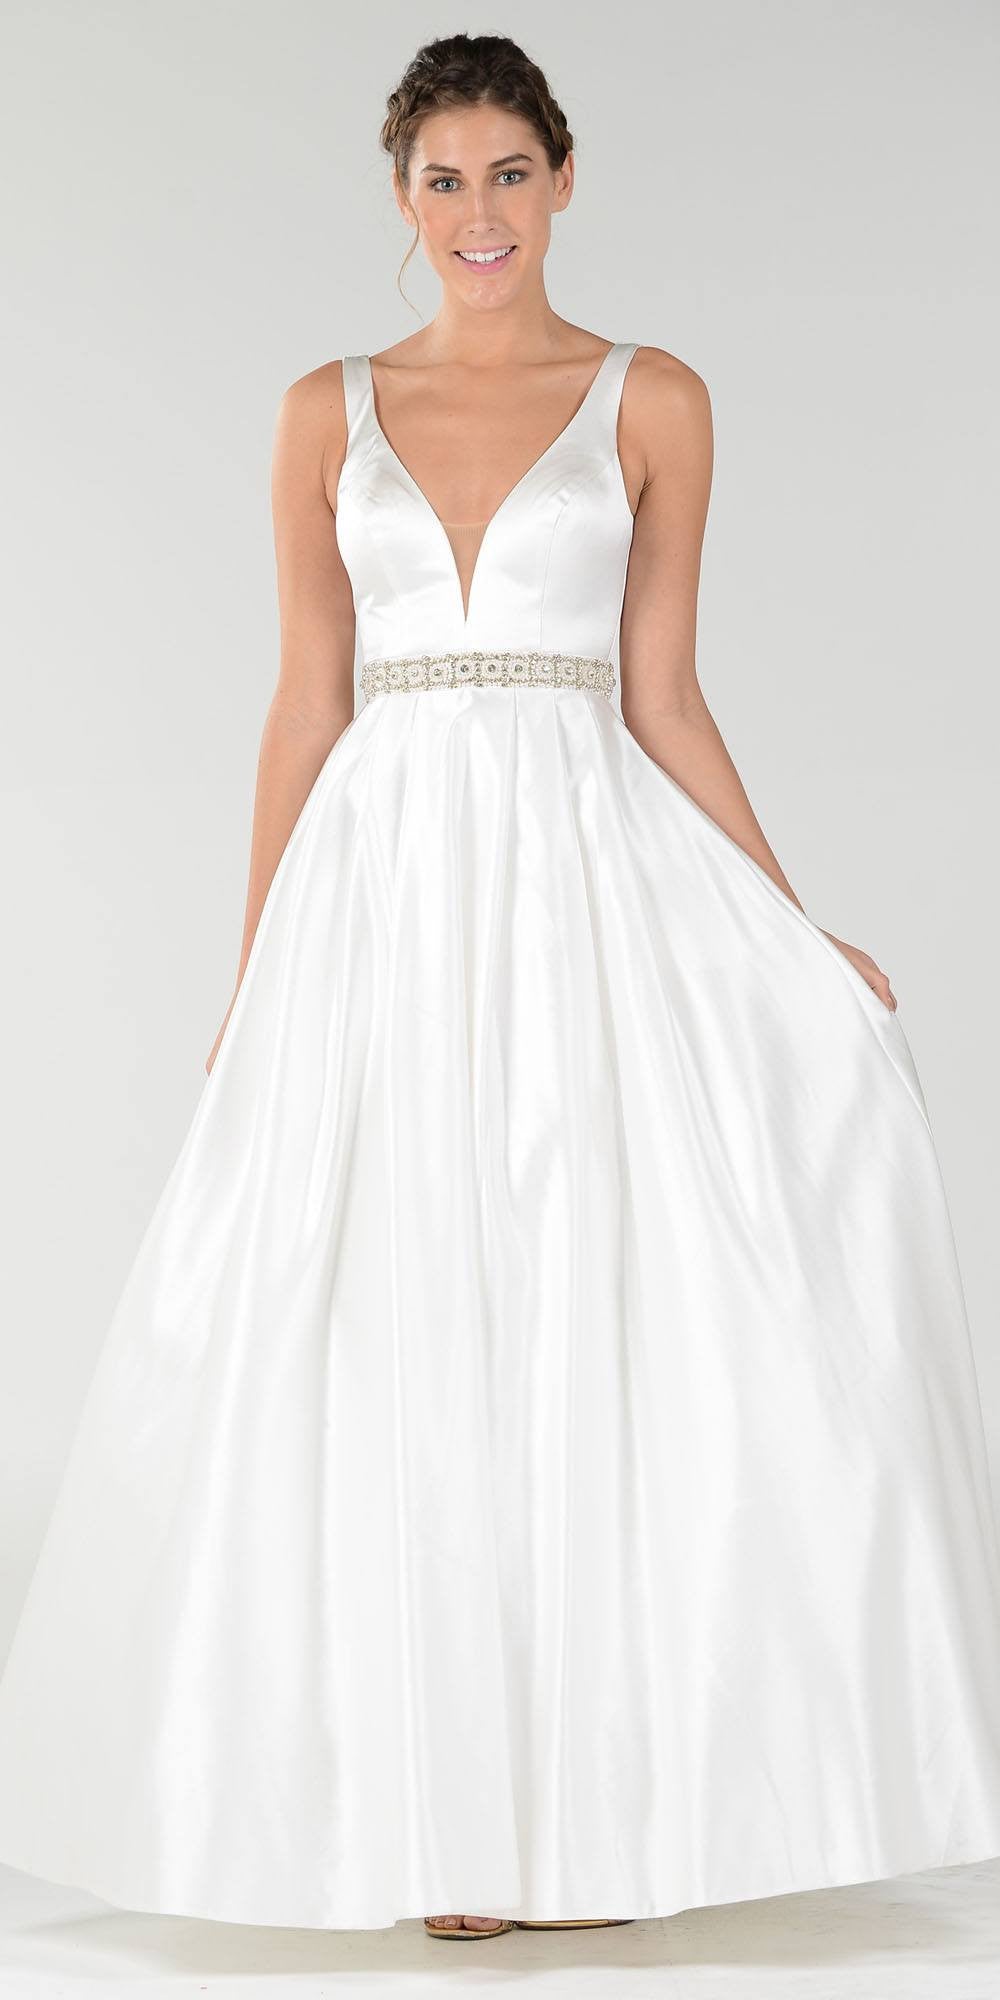 Poly USA 7932 Embellished Waist Plunging V-Neck Off White Satin Ball Gown A-Line